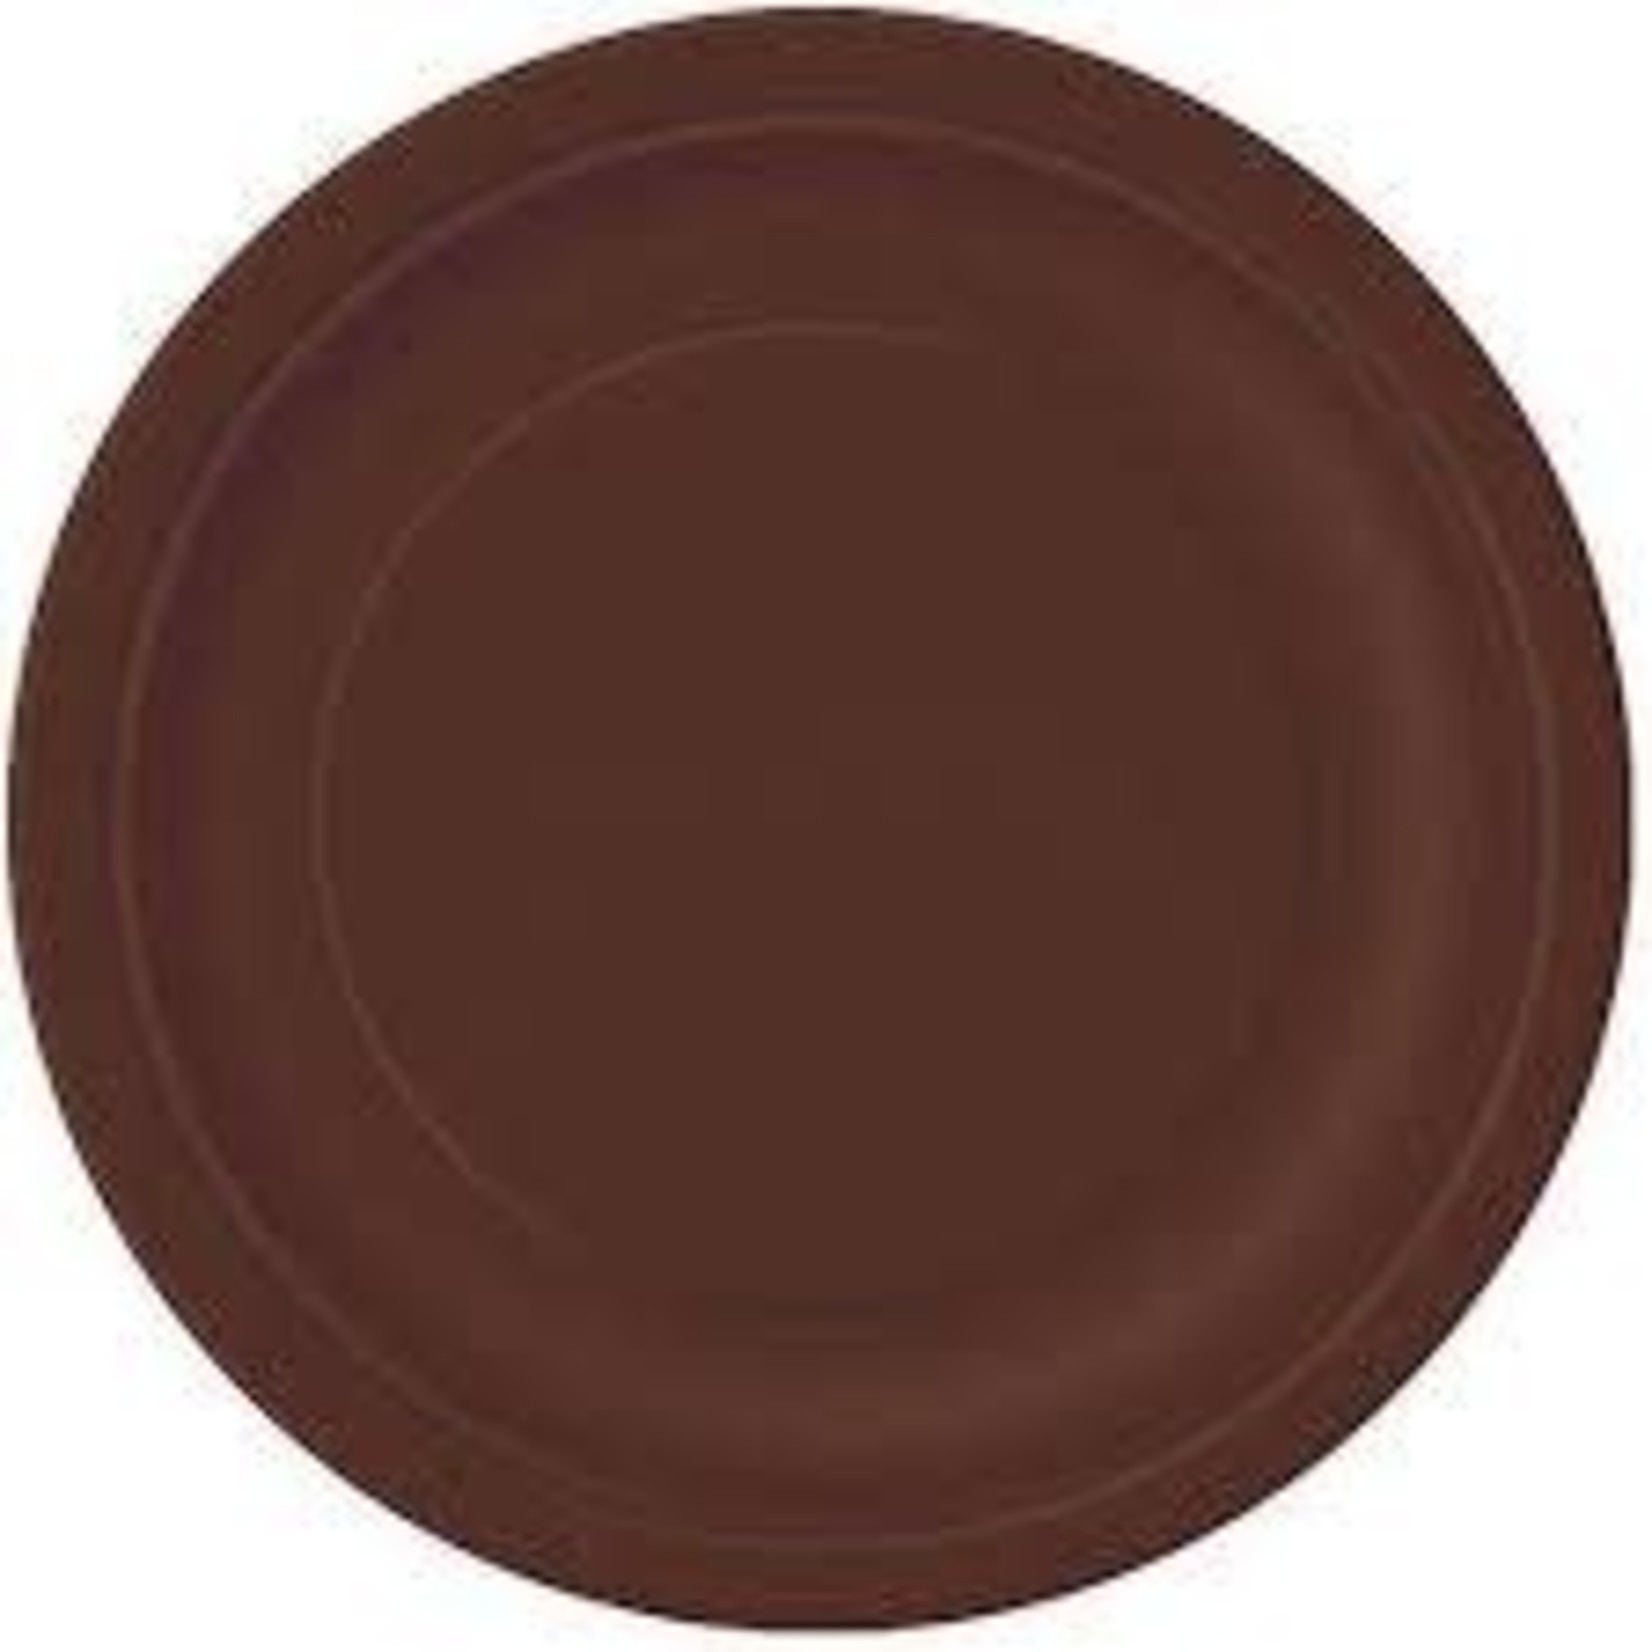 Brown Paper 7" Plates 50ct